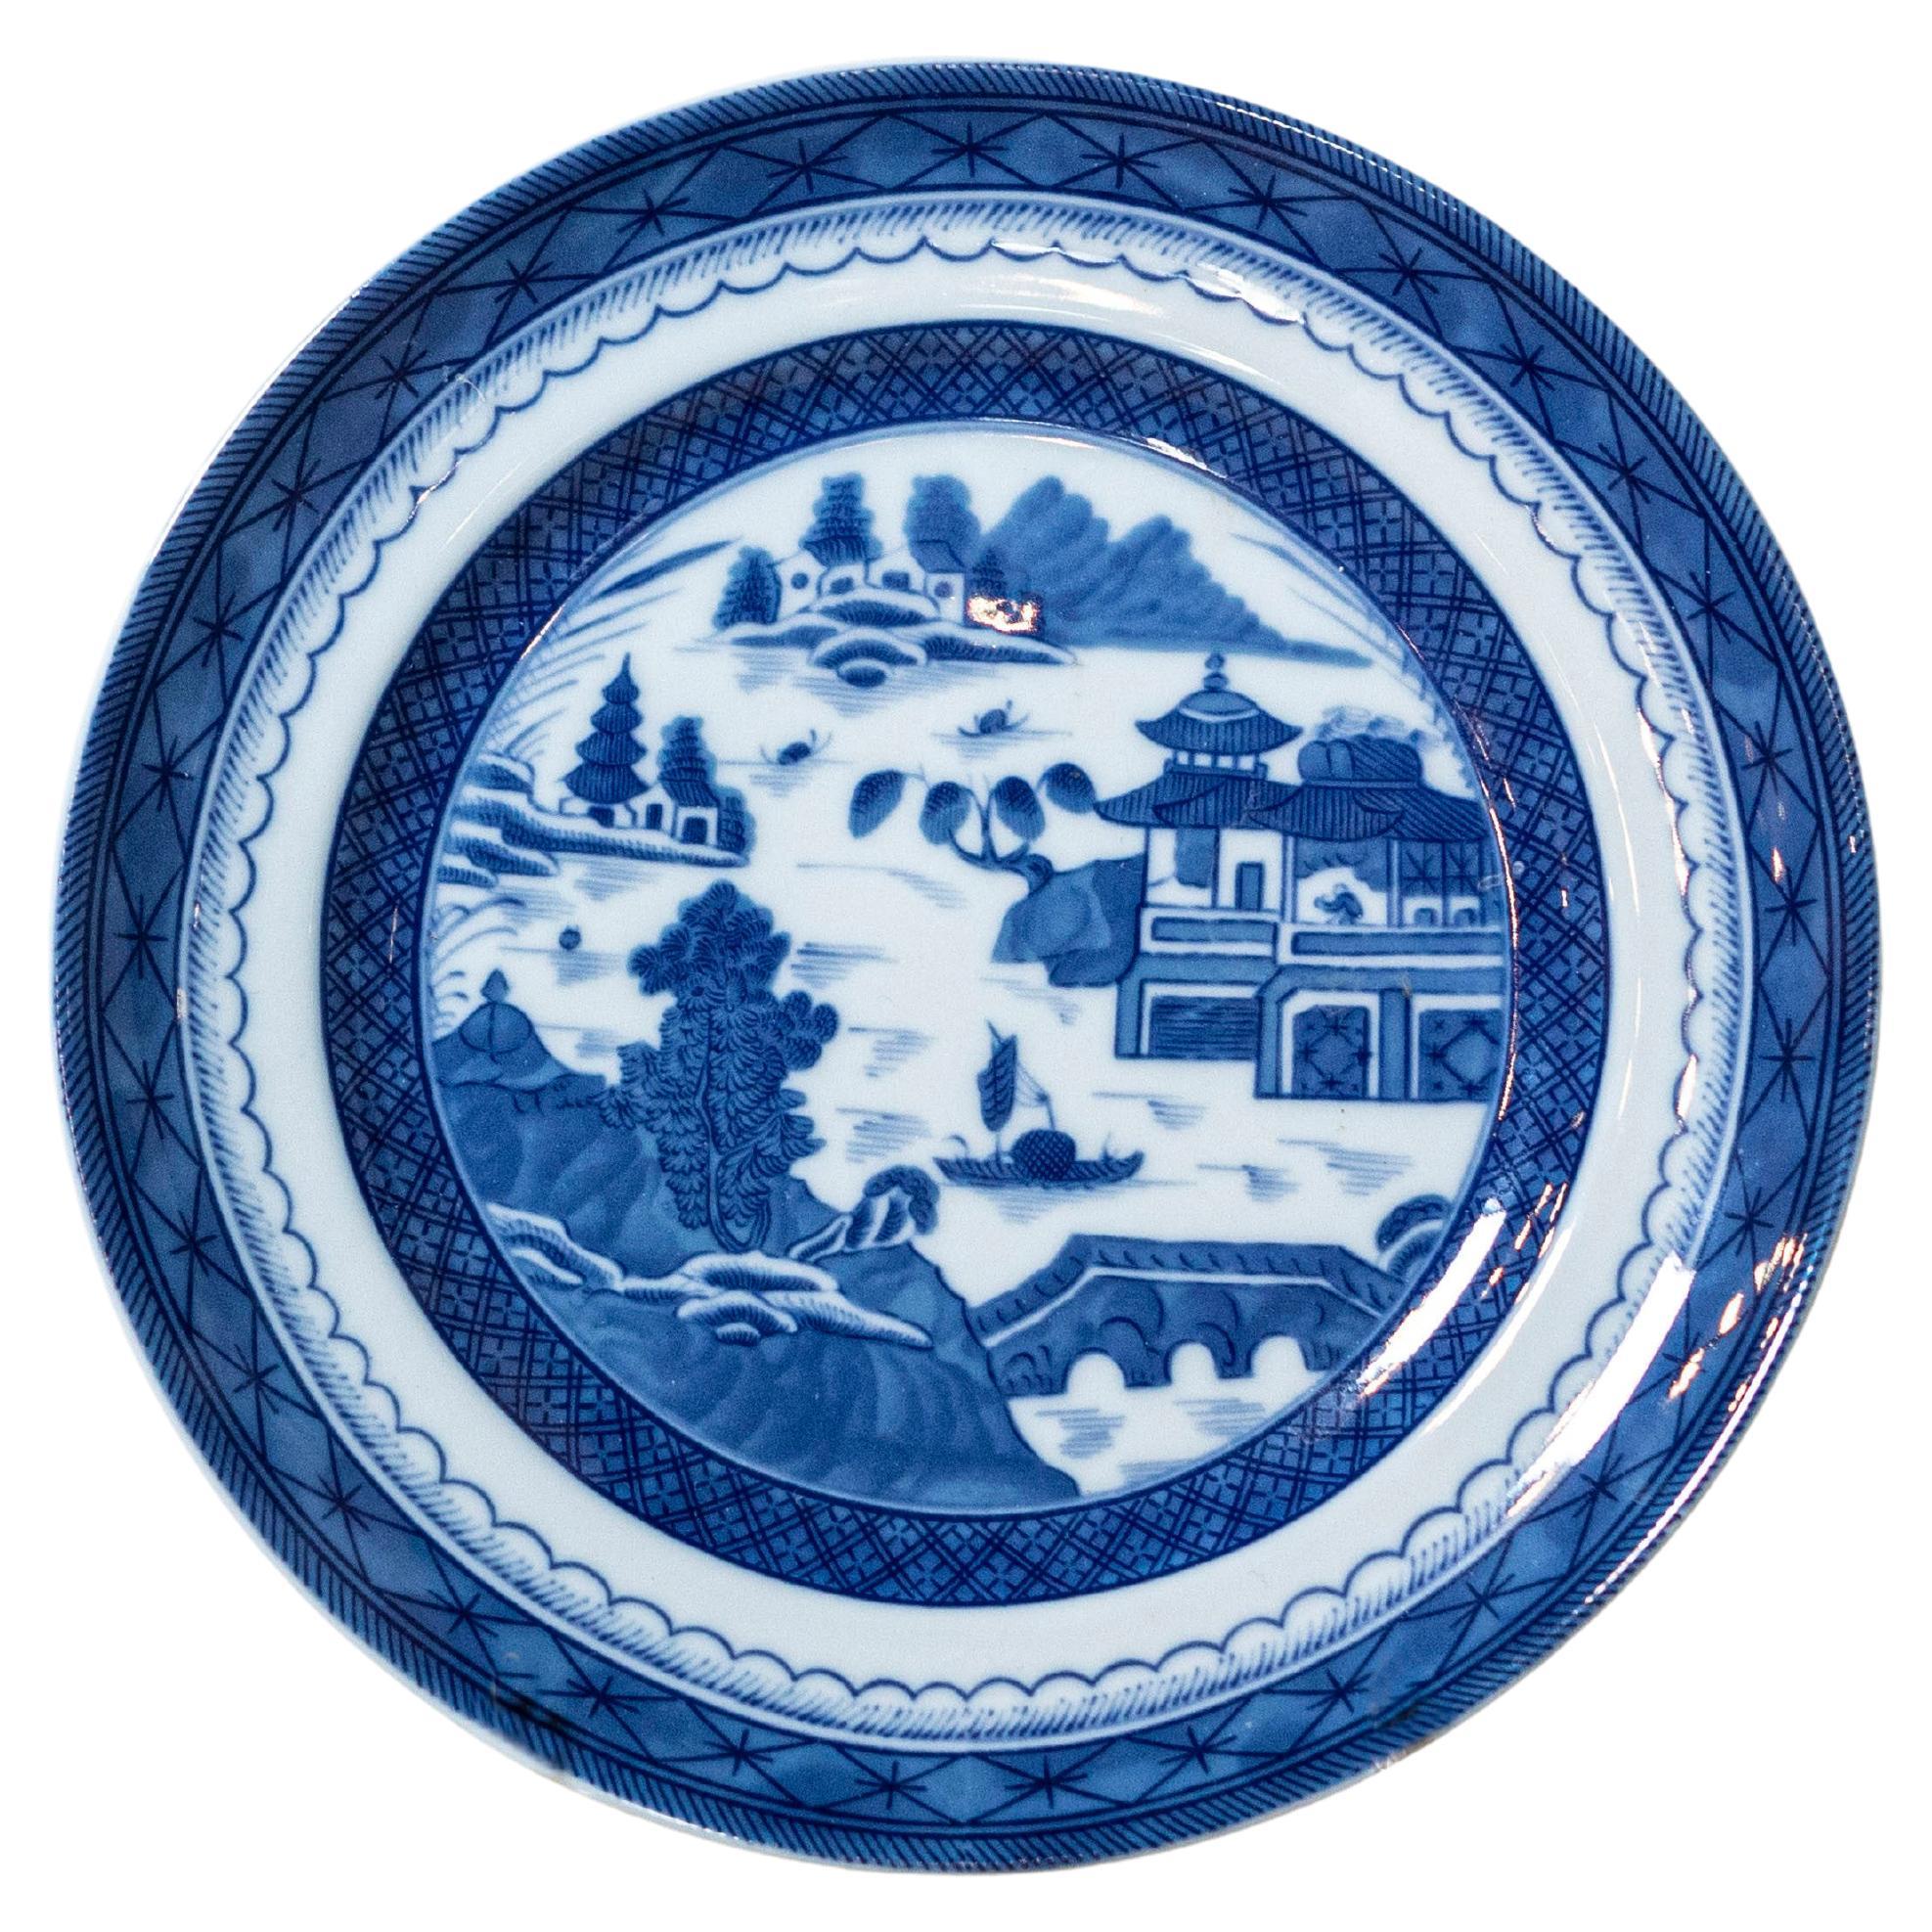 Mottahedeh Blue Canton Porcelain Plate with Blue and White Chinese Landscape For Sale